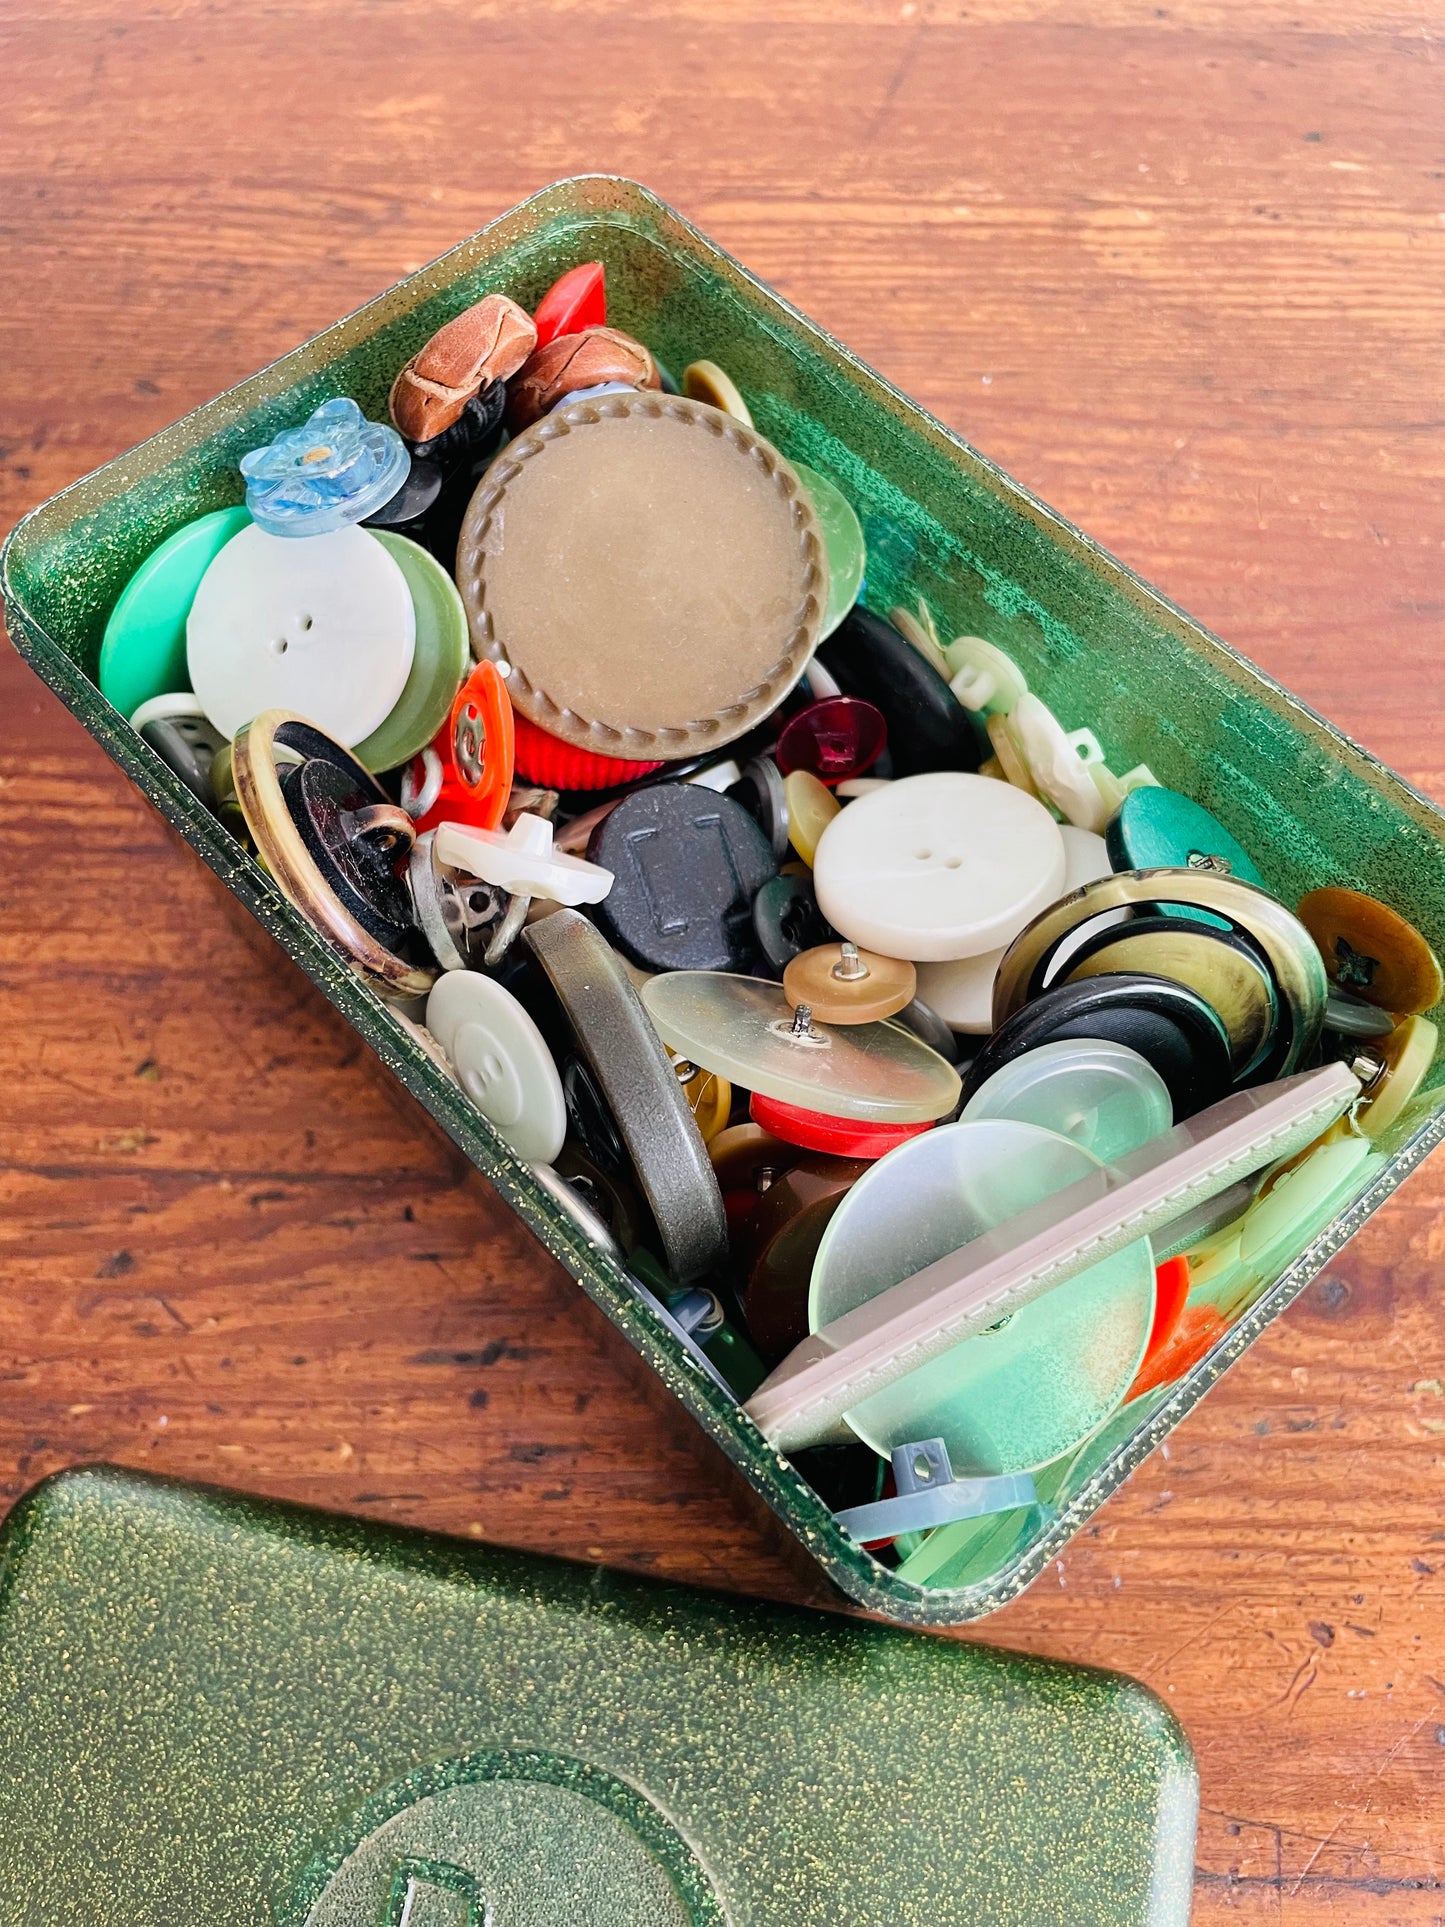 Mystery Button Box - 1970s Benson & Hedges Canada Tobacco Case filled with Vintage Buttons